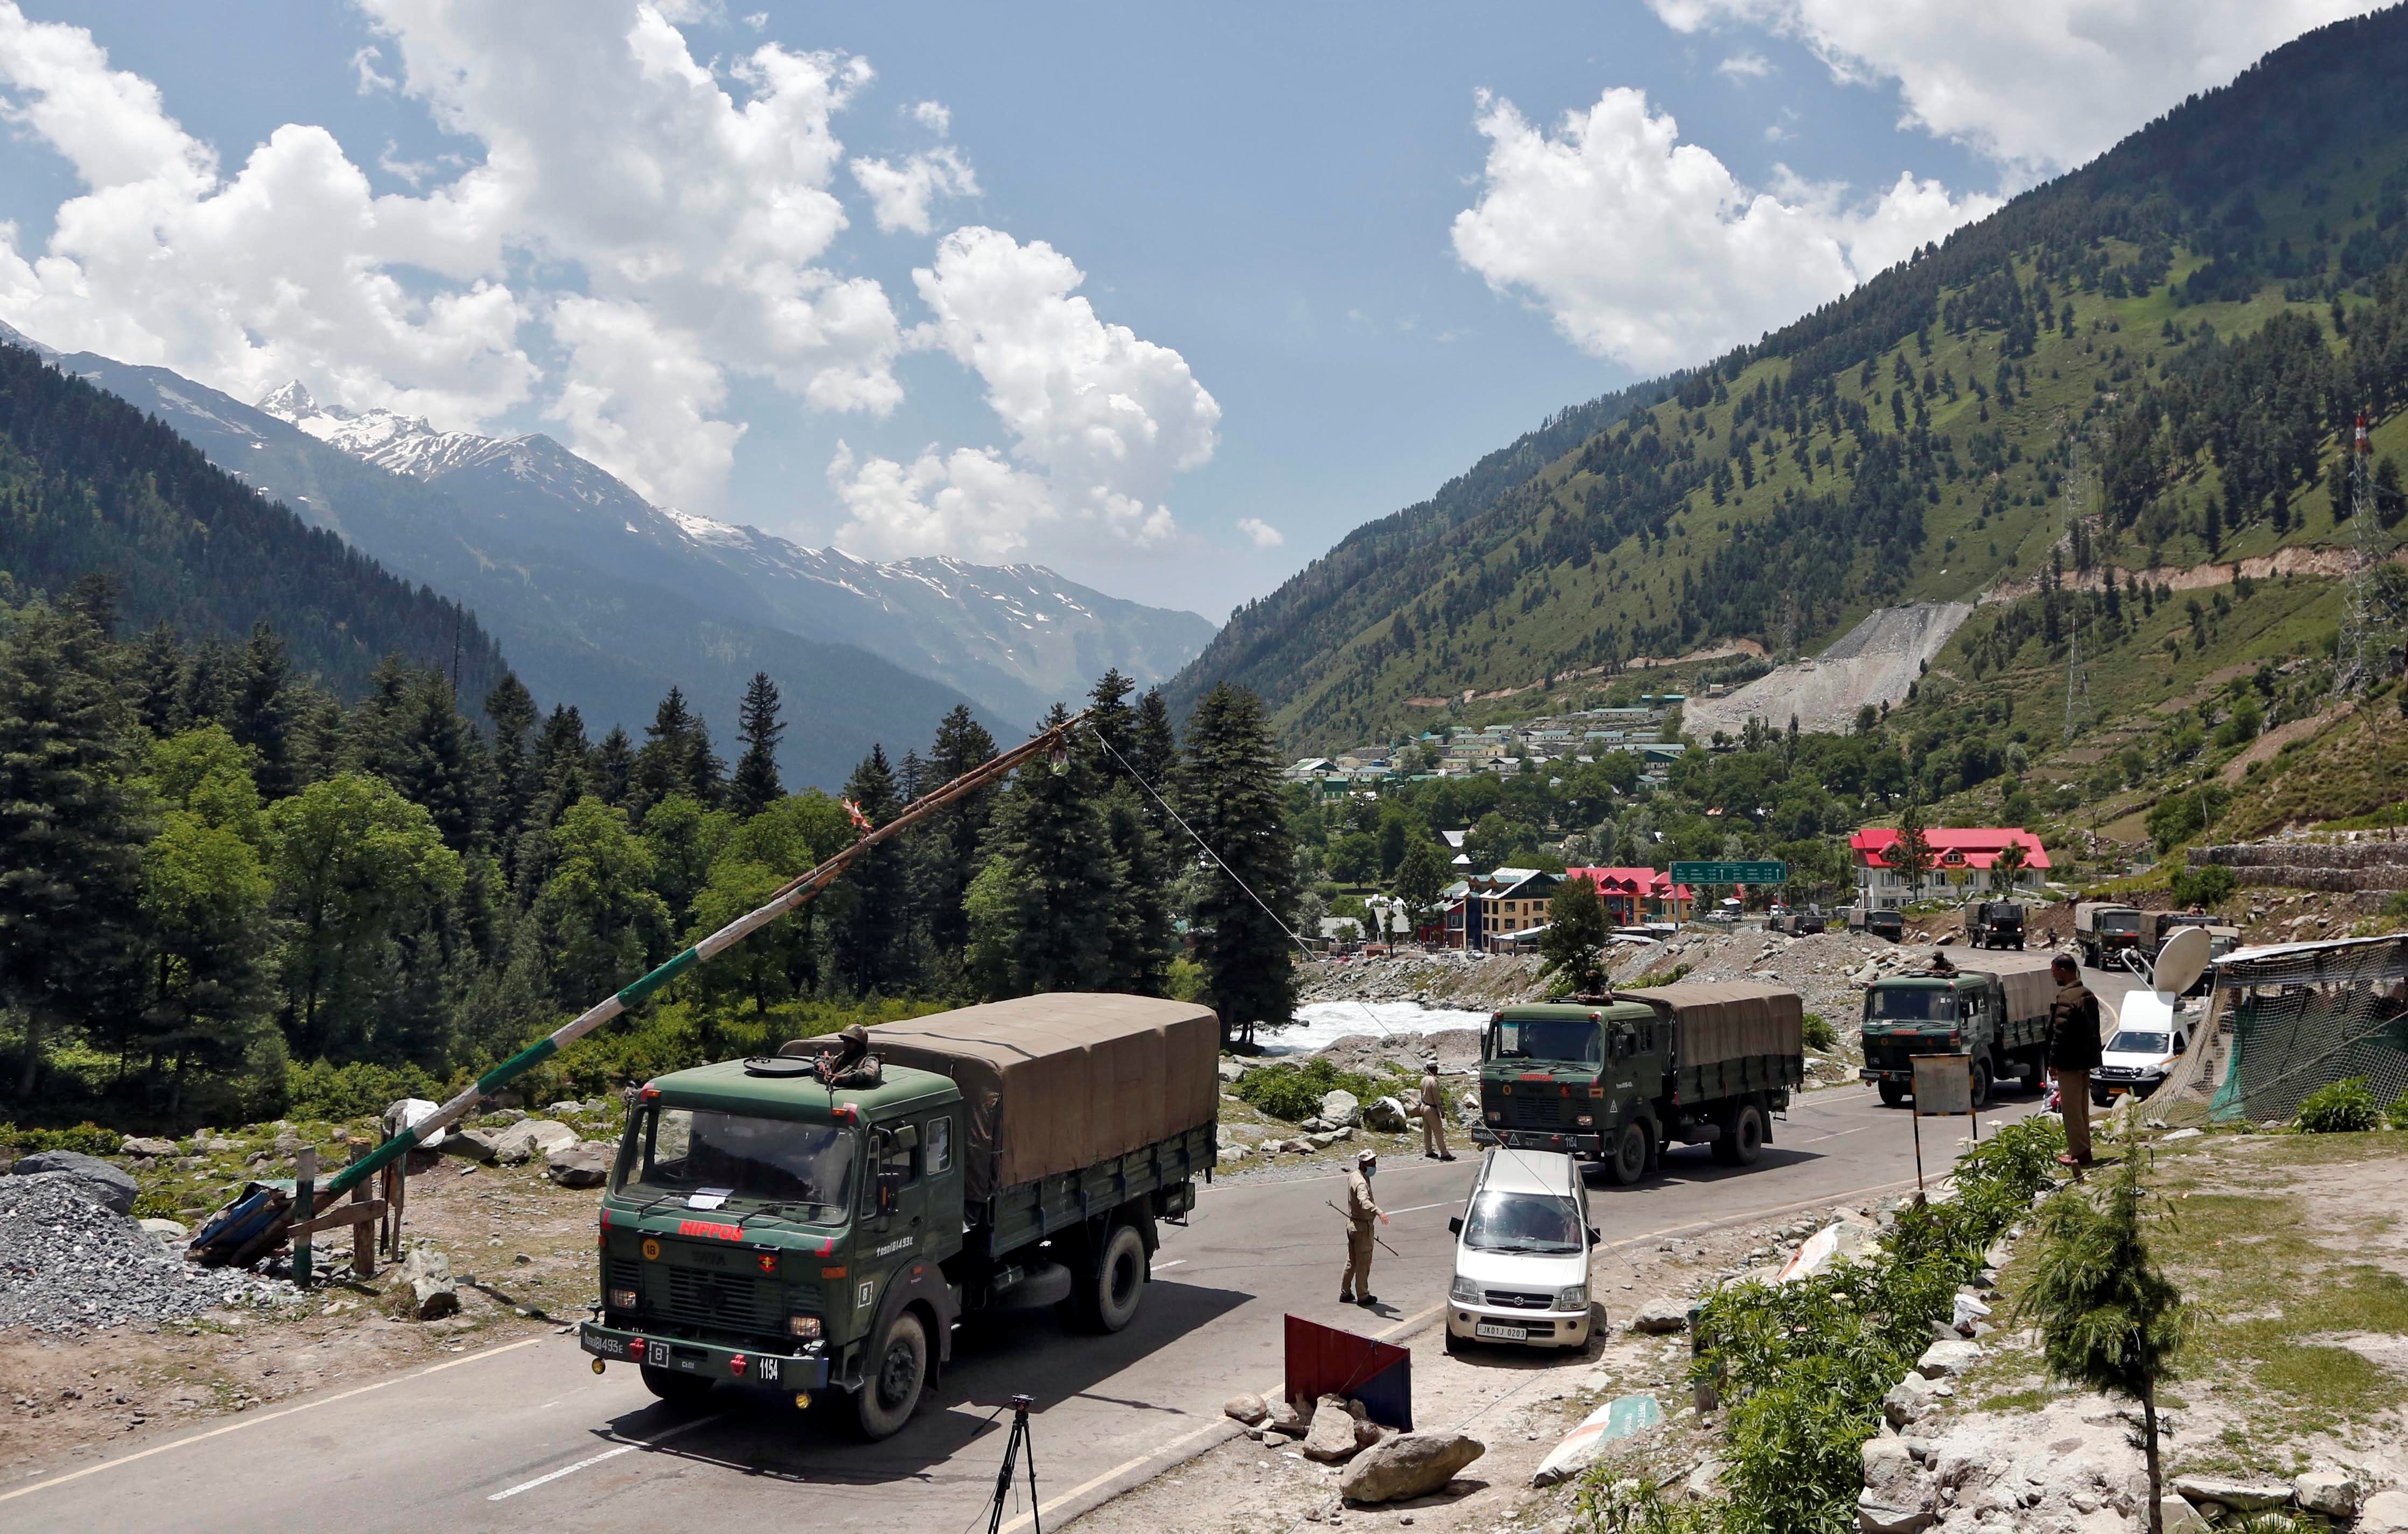 Indian army trucks move along a highway leading to Ladakh, at Gagangeer in Kashmir's Ganderbal district June 17, 2020. REUTERS/Danish Ismail